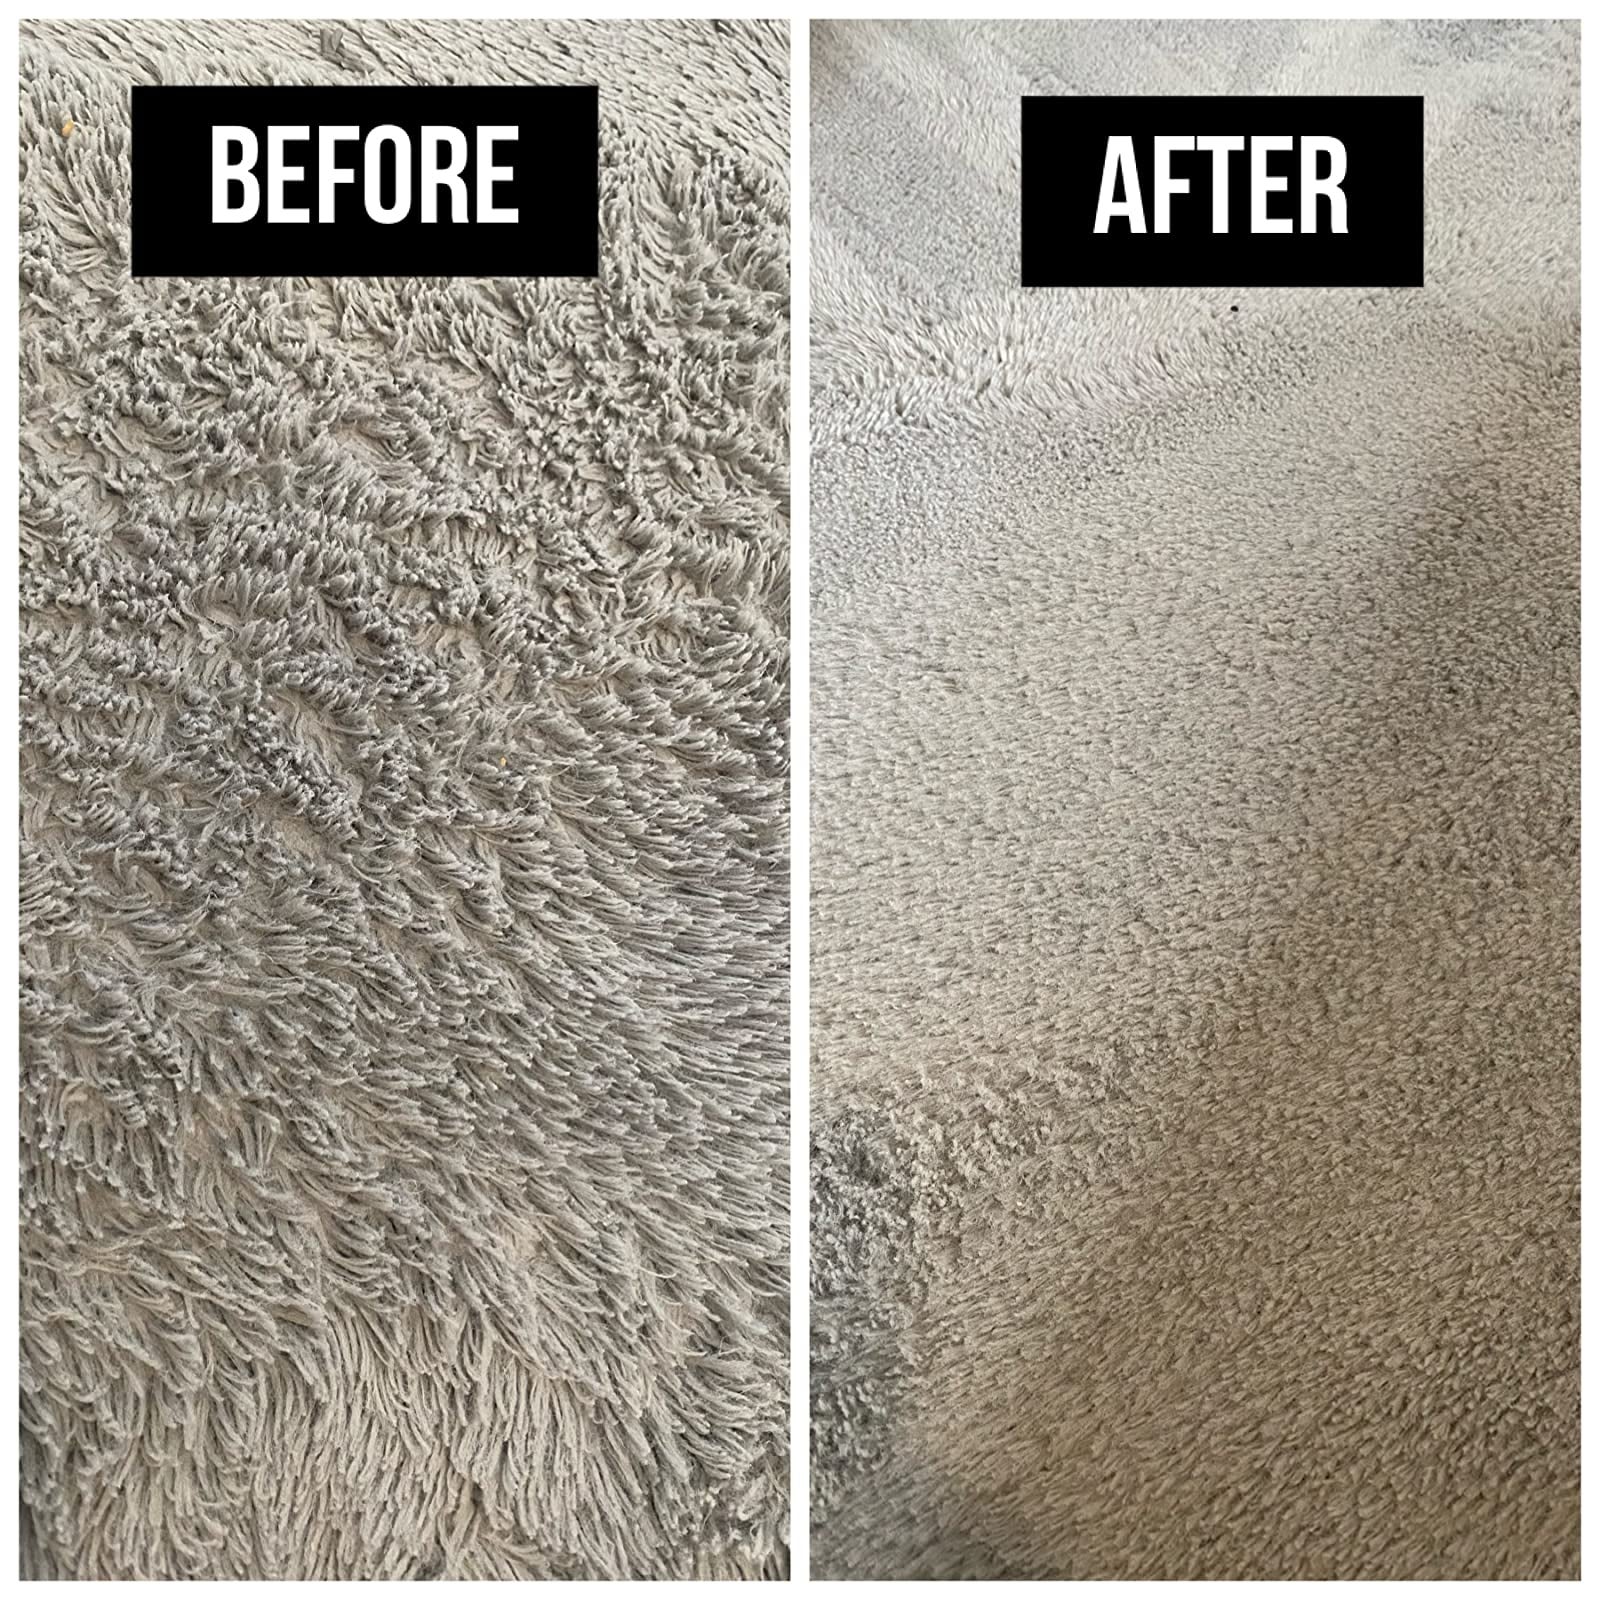 side by side of a matted rug before and after the brush was used